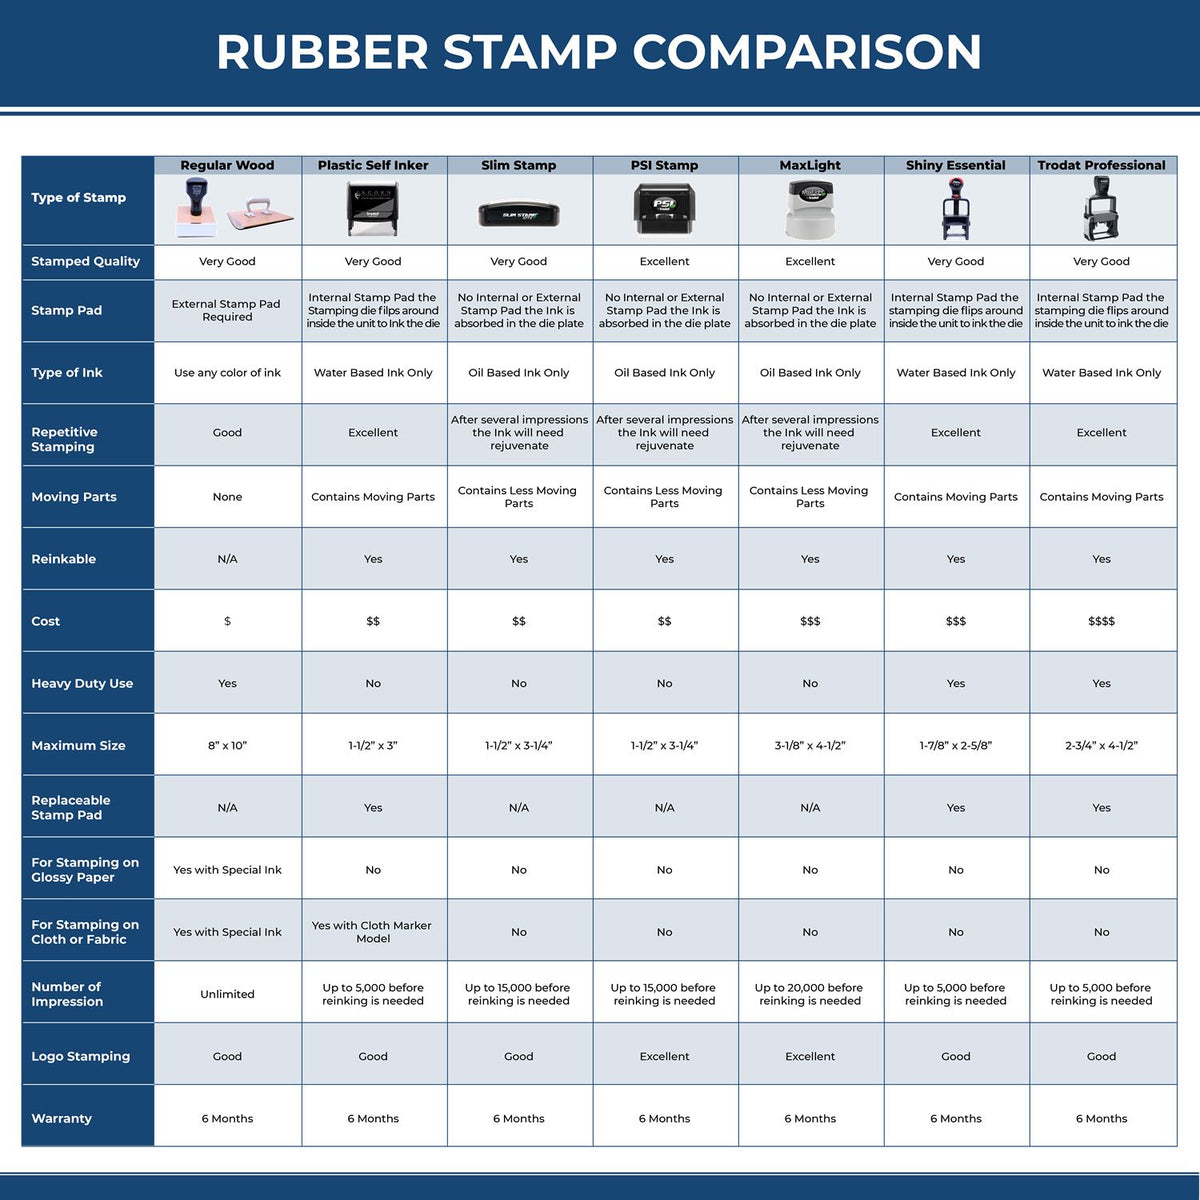 A comparison chart for the different types of mount models available for the MaxLight Premium Pre-Inked Rhode Island Rectangular Notarial Stamp.